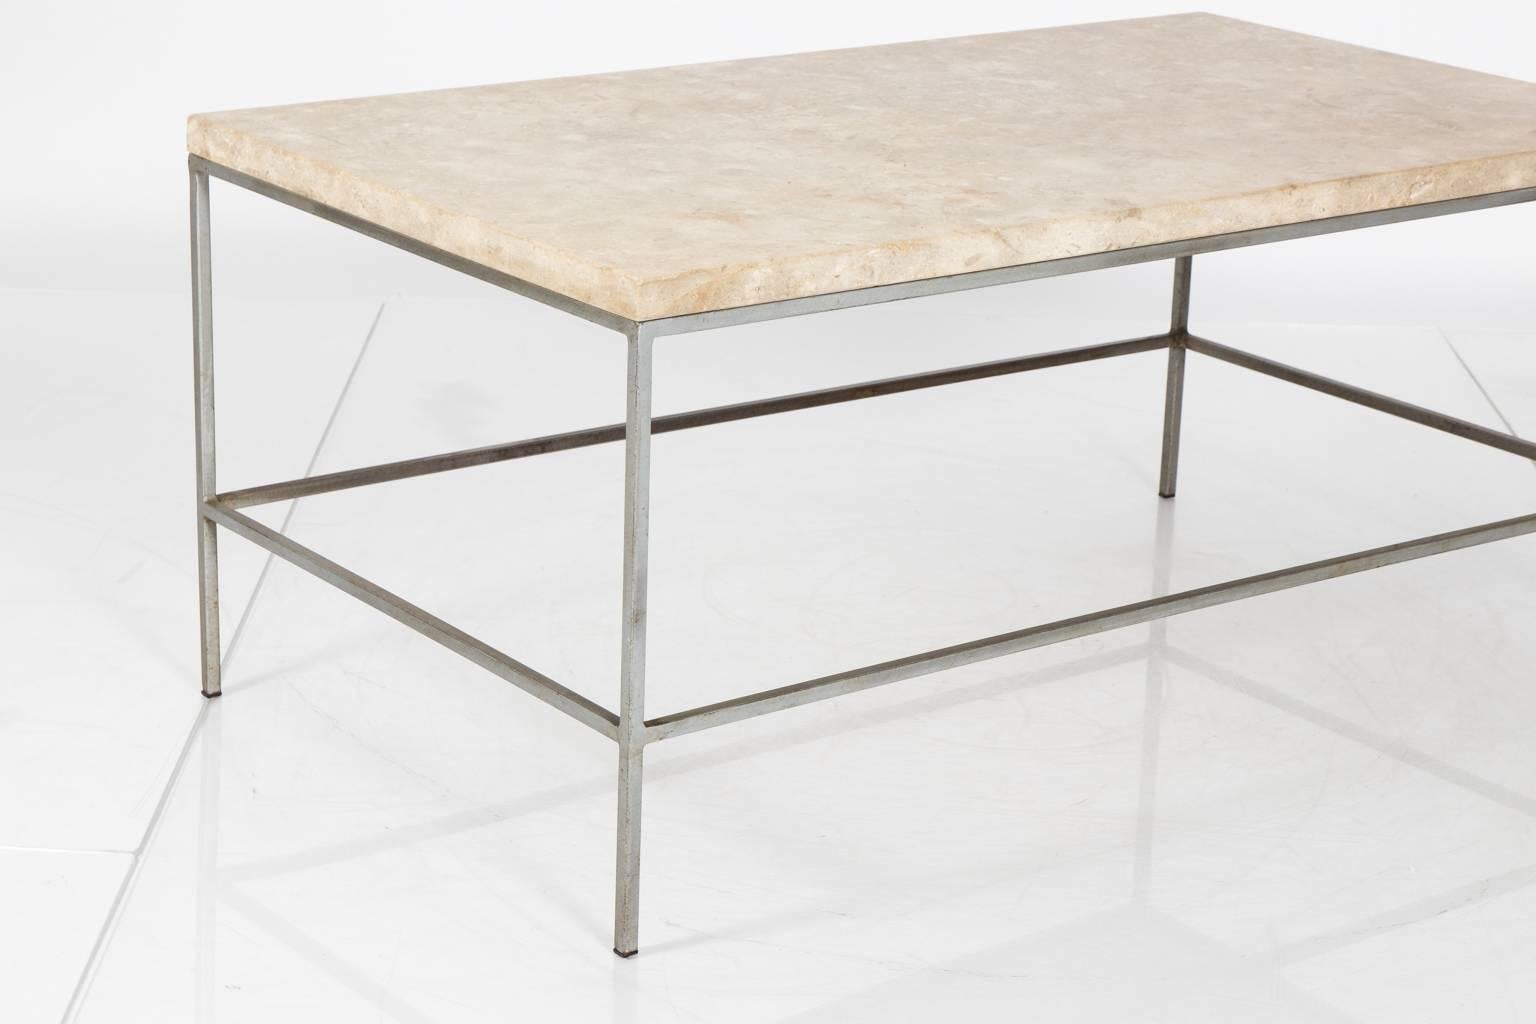 Midcentury Steel Coffee Table In Good Condition For Sale In Stamford, CT